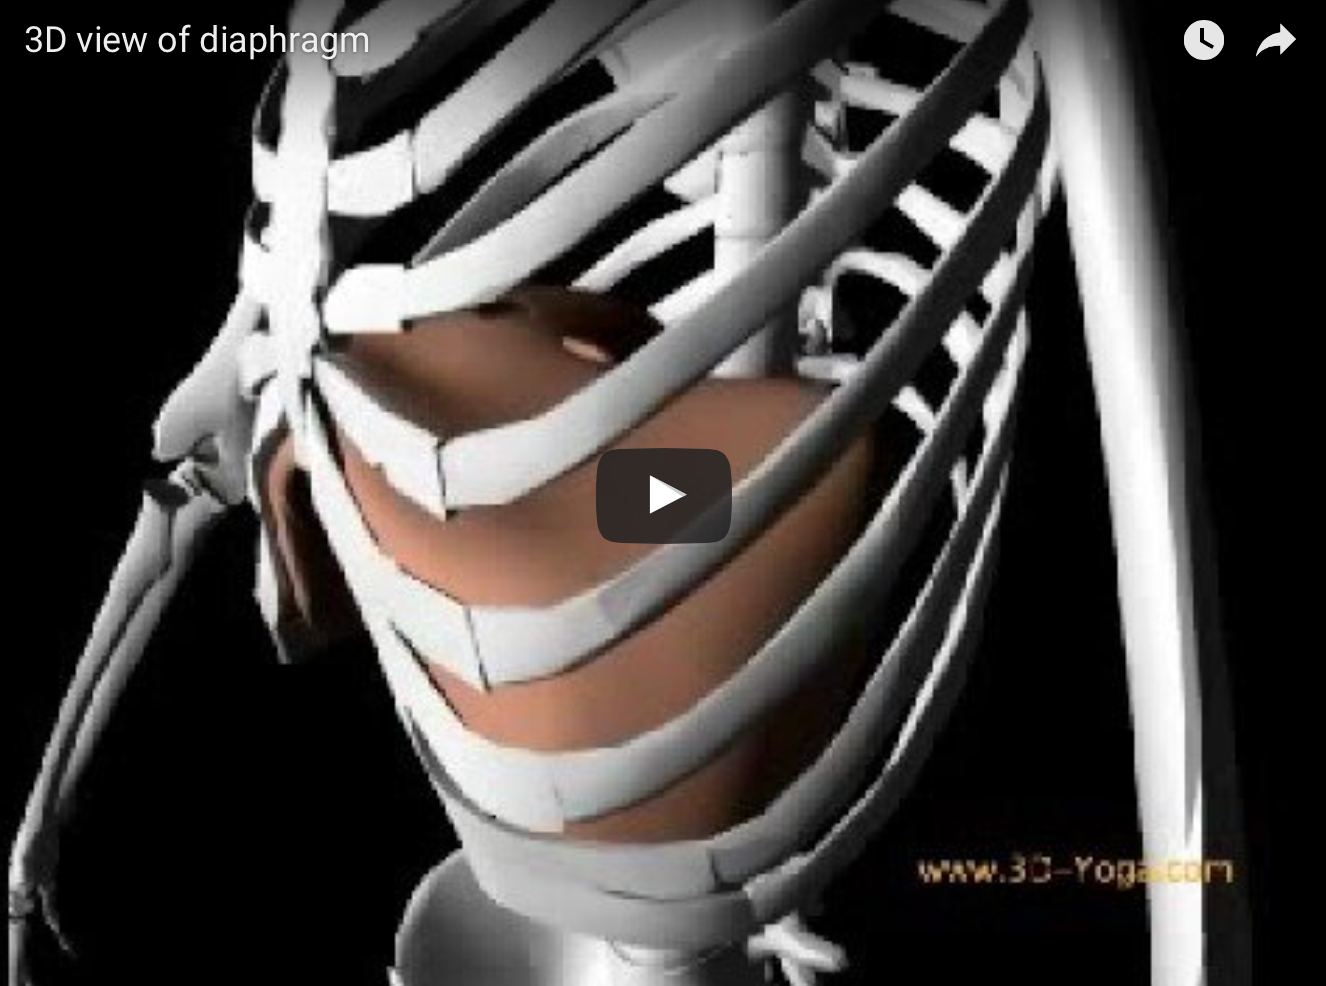 To see the reason I am blogging about this short animation of the diaphragm and rib cage in a...